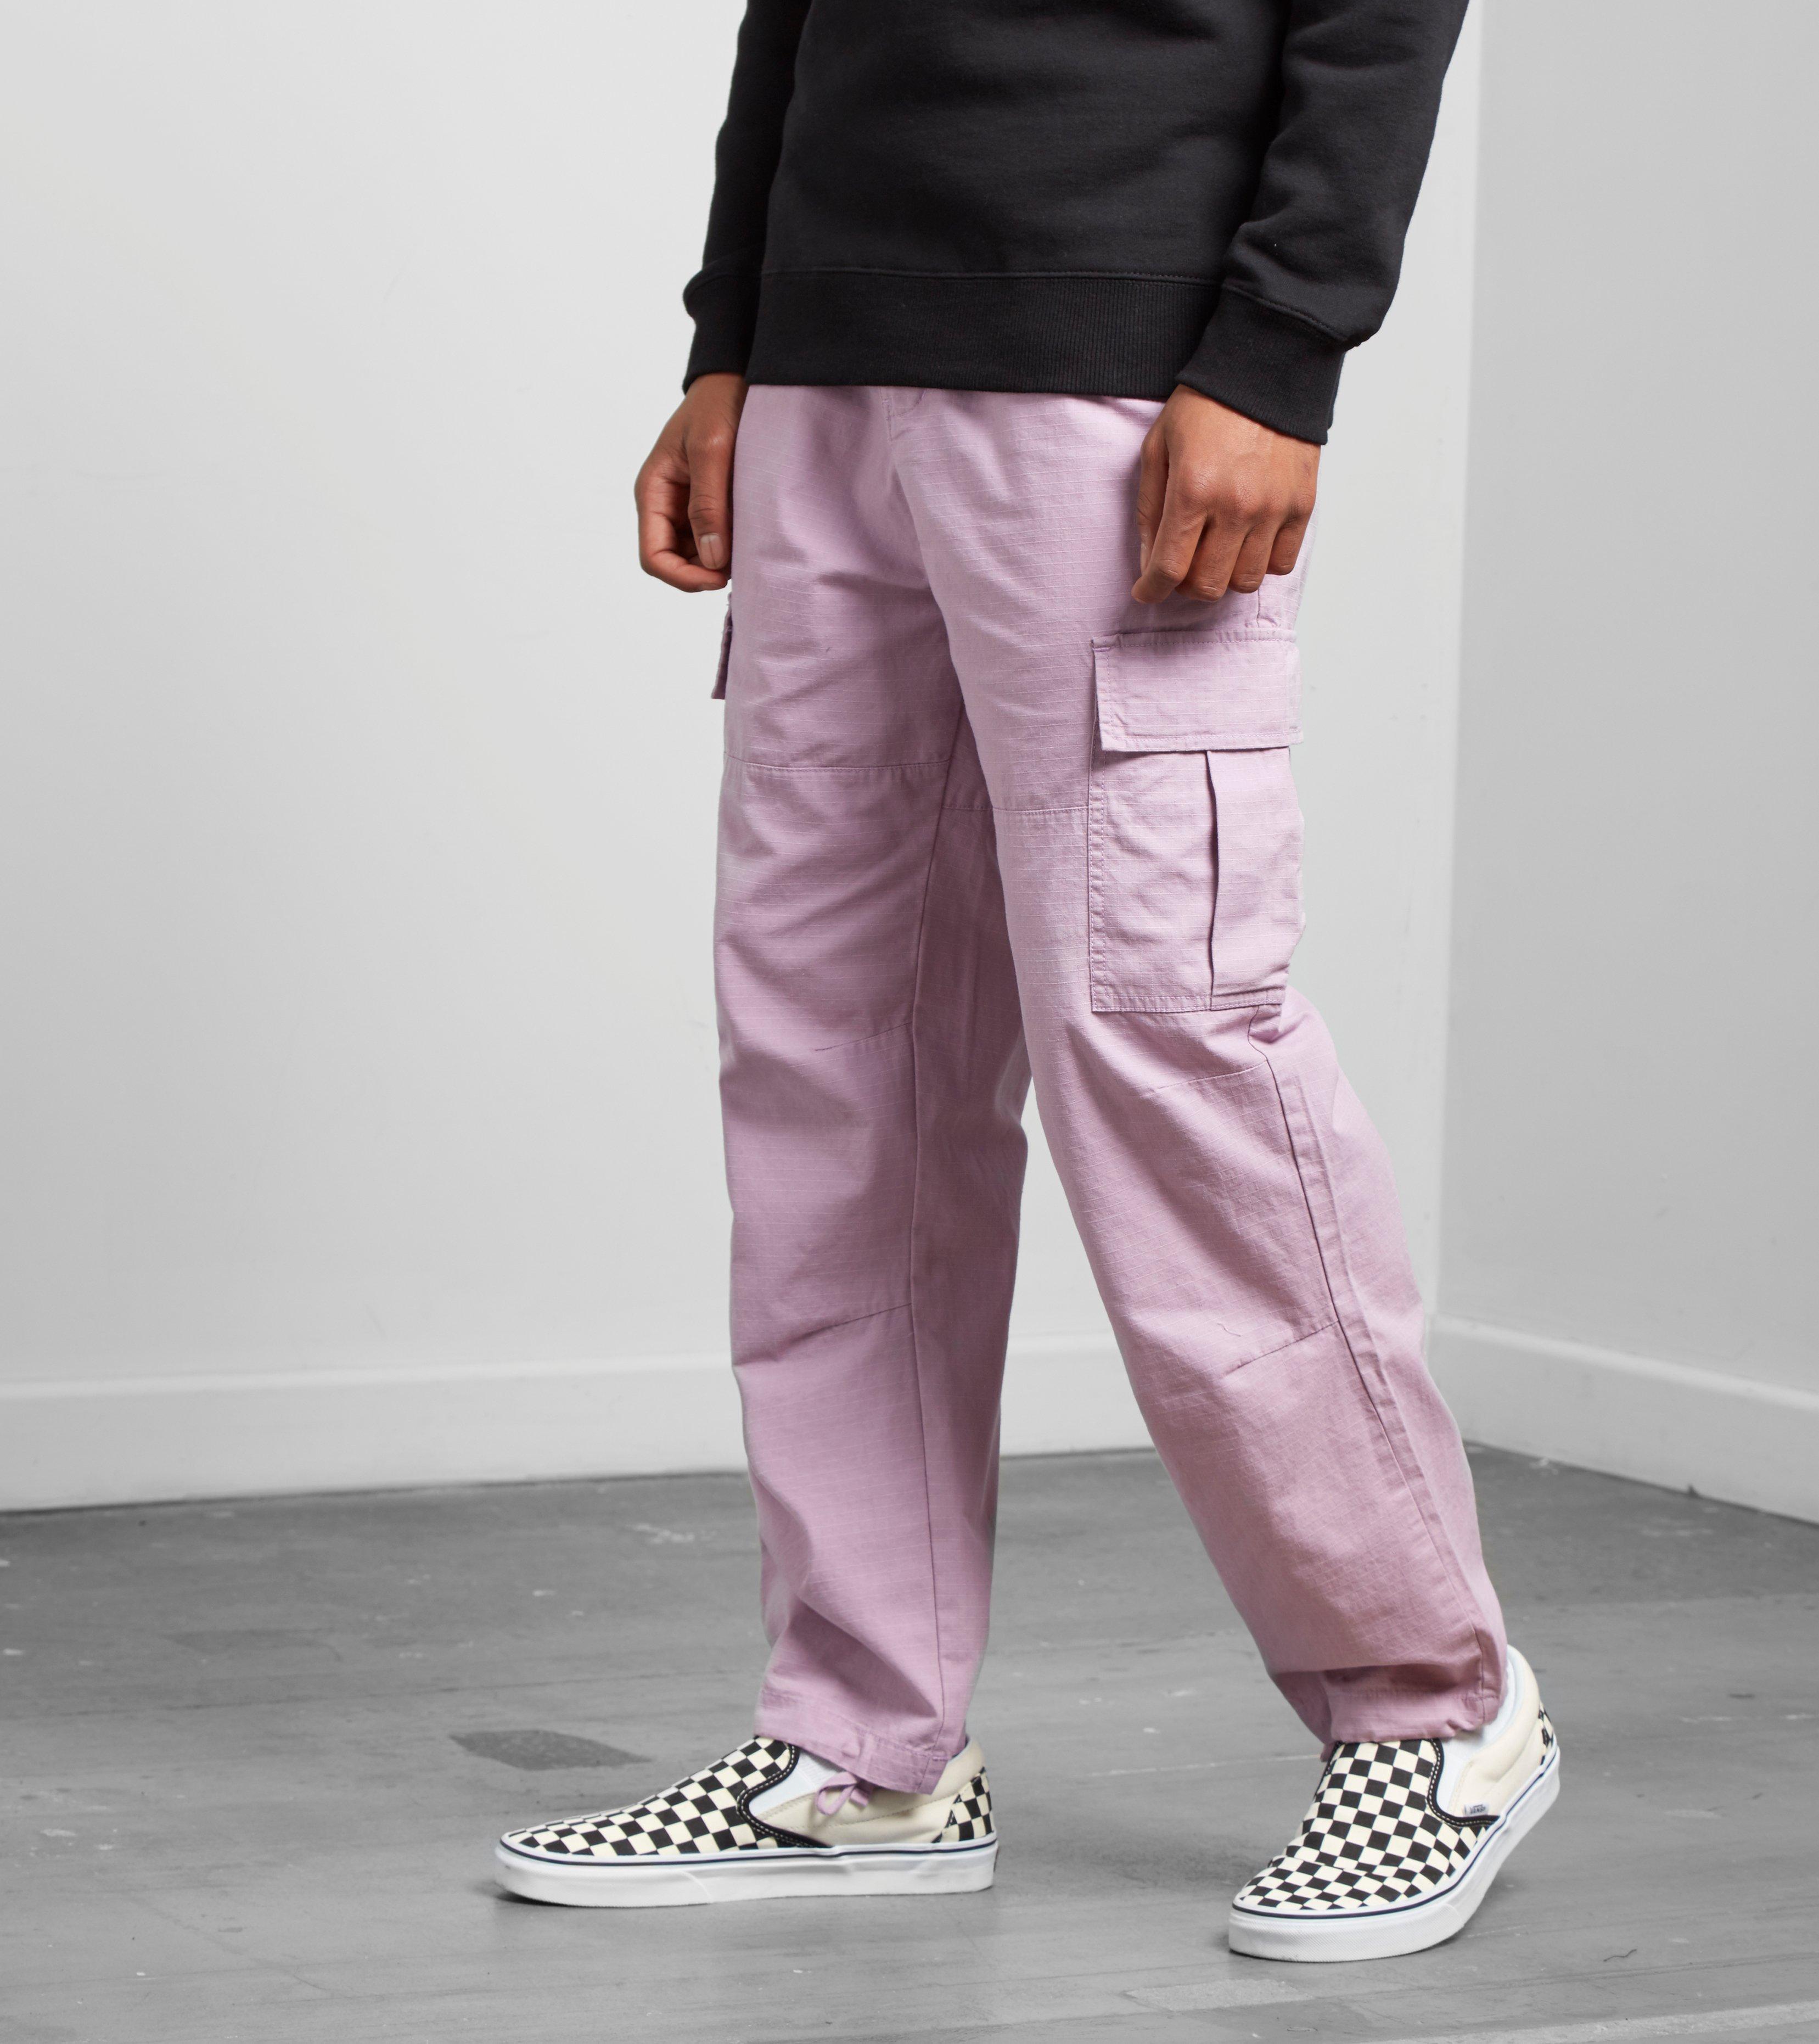 Lyst - Stussy Ripstop Cargo Pants in Purple for Men - Save 7%